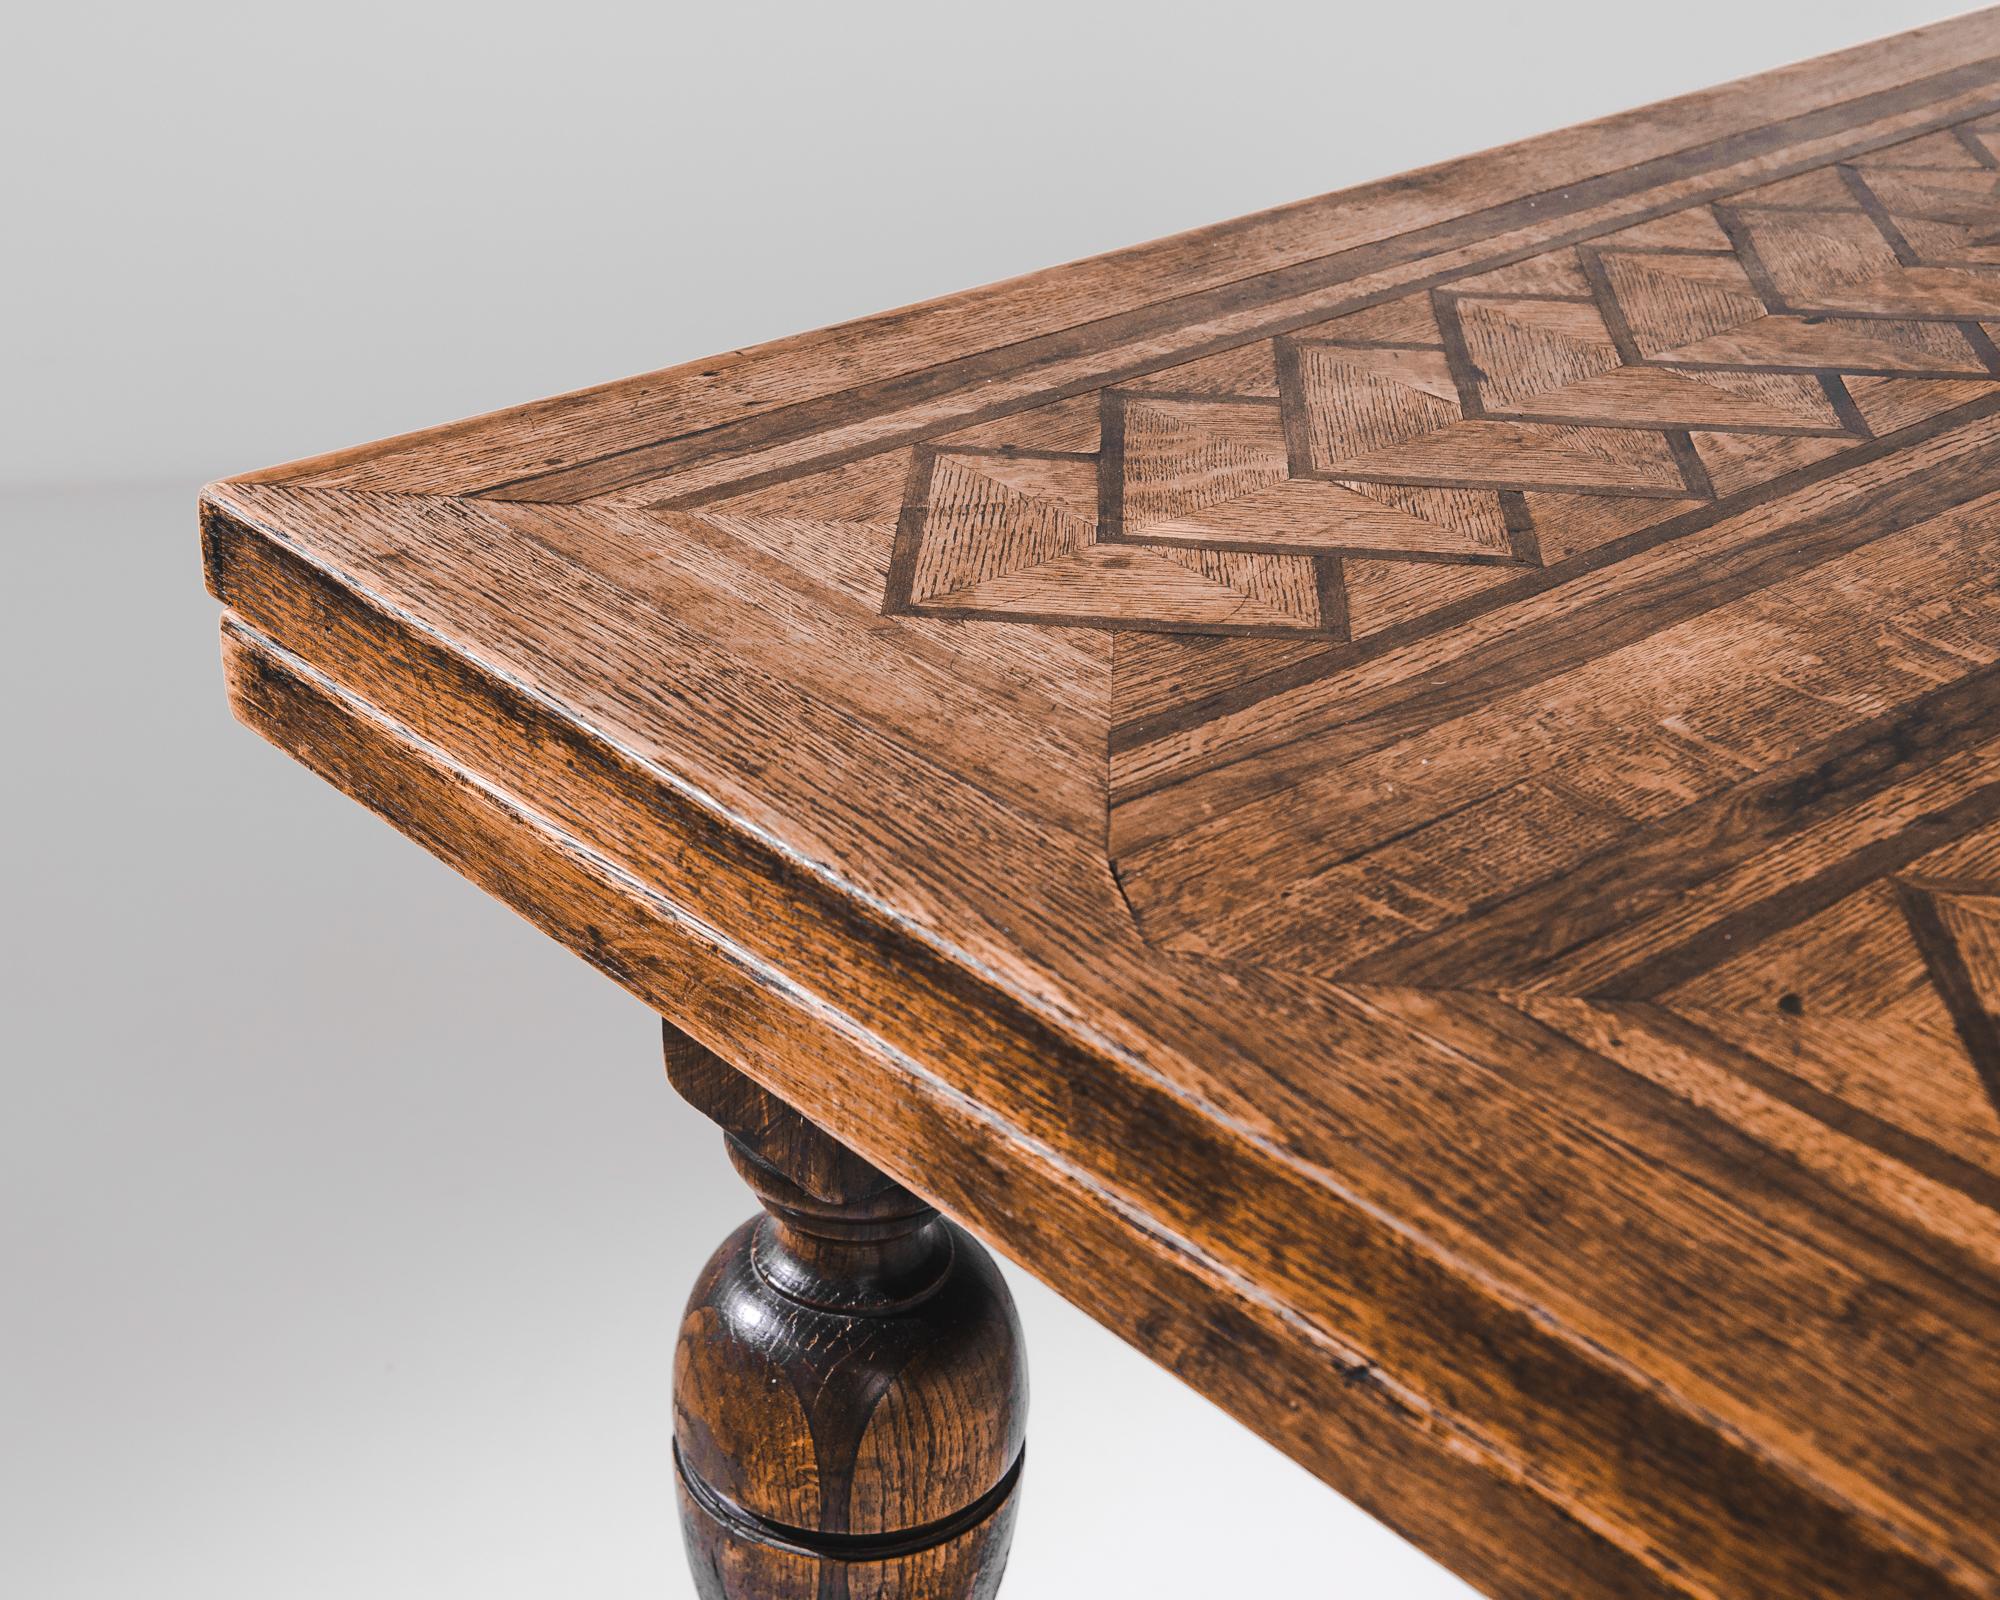 19th Century Antique Wooden Table With Folding Tabletop